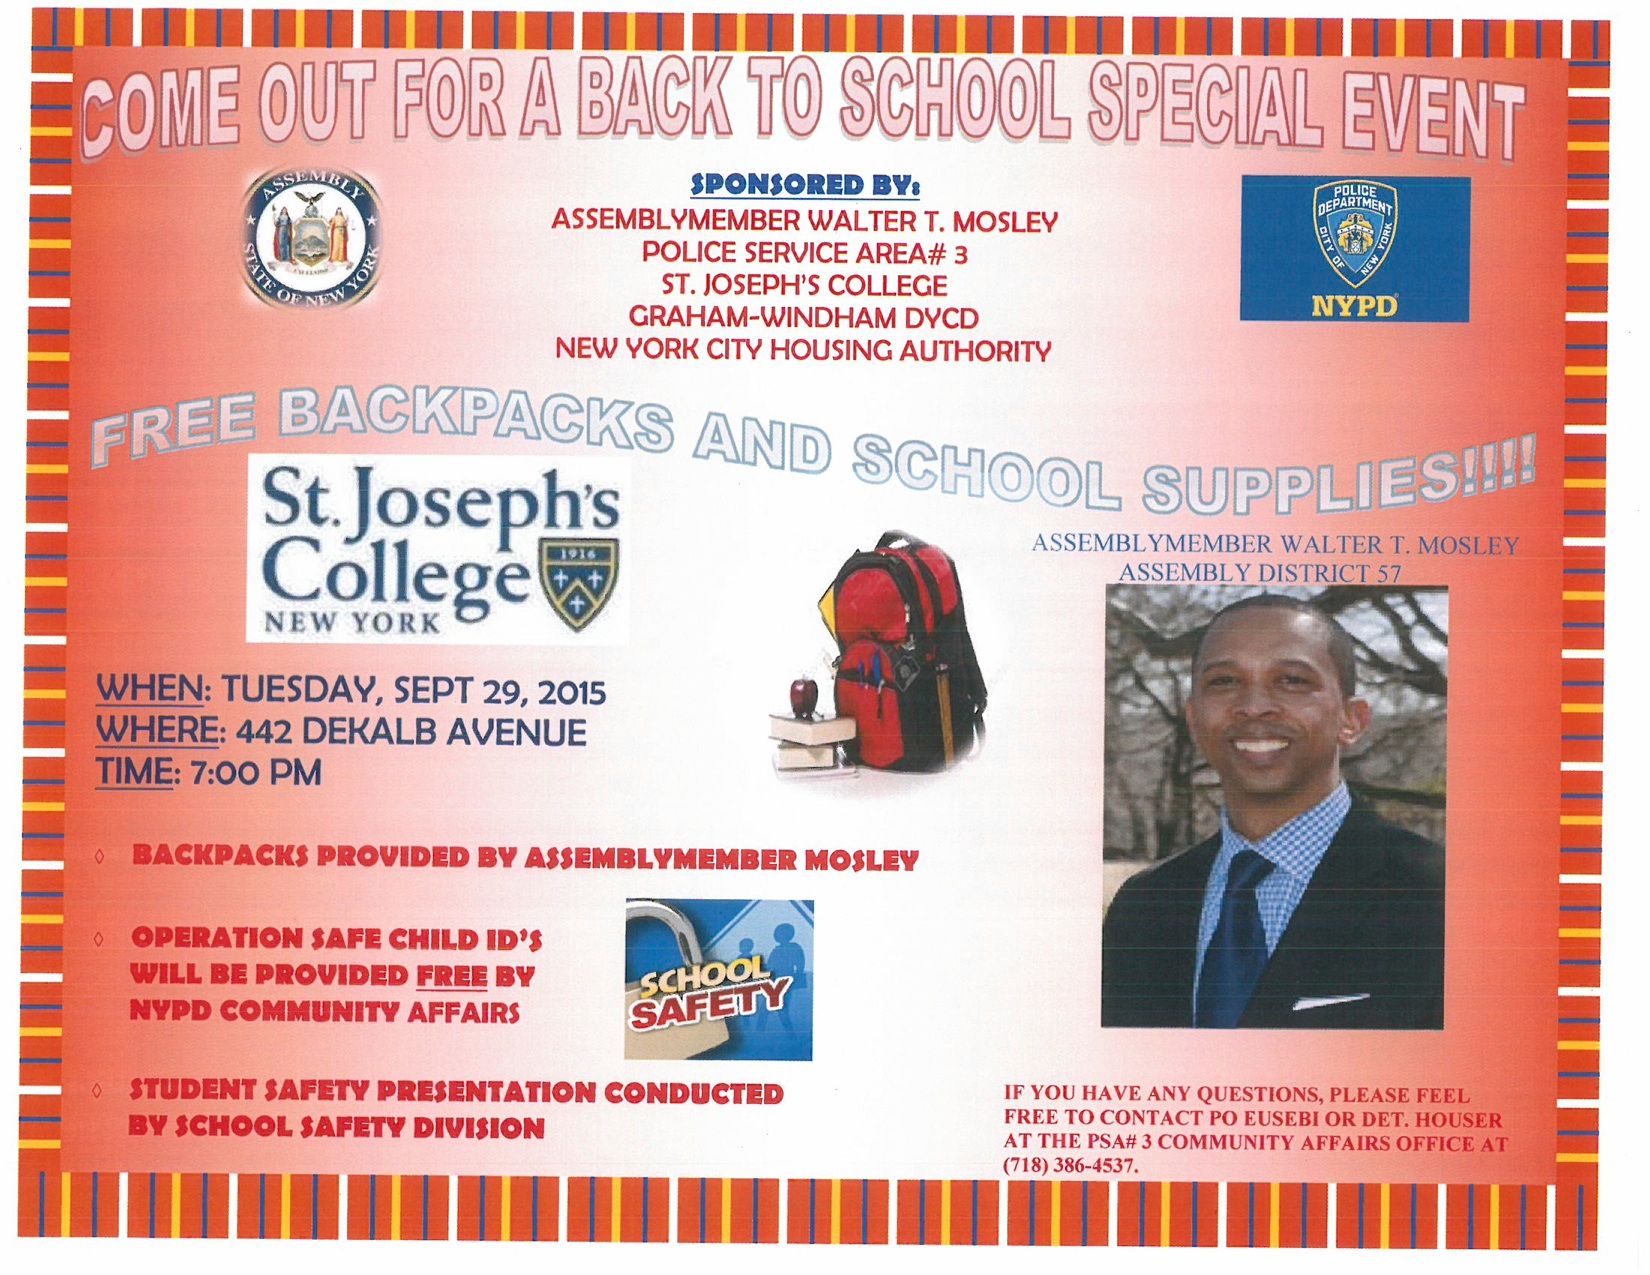 Donate School Supplies For Back-To-School Event Hosted By AM Mosley, PSA 3, And St Joseph’s College